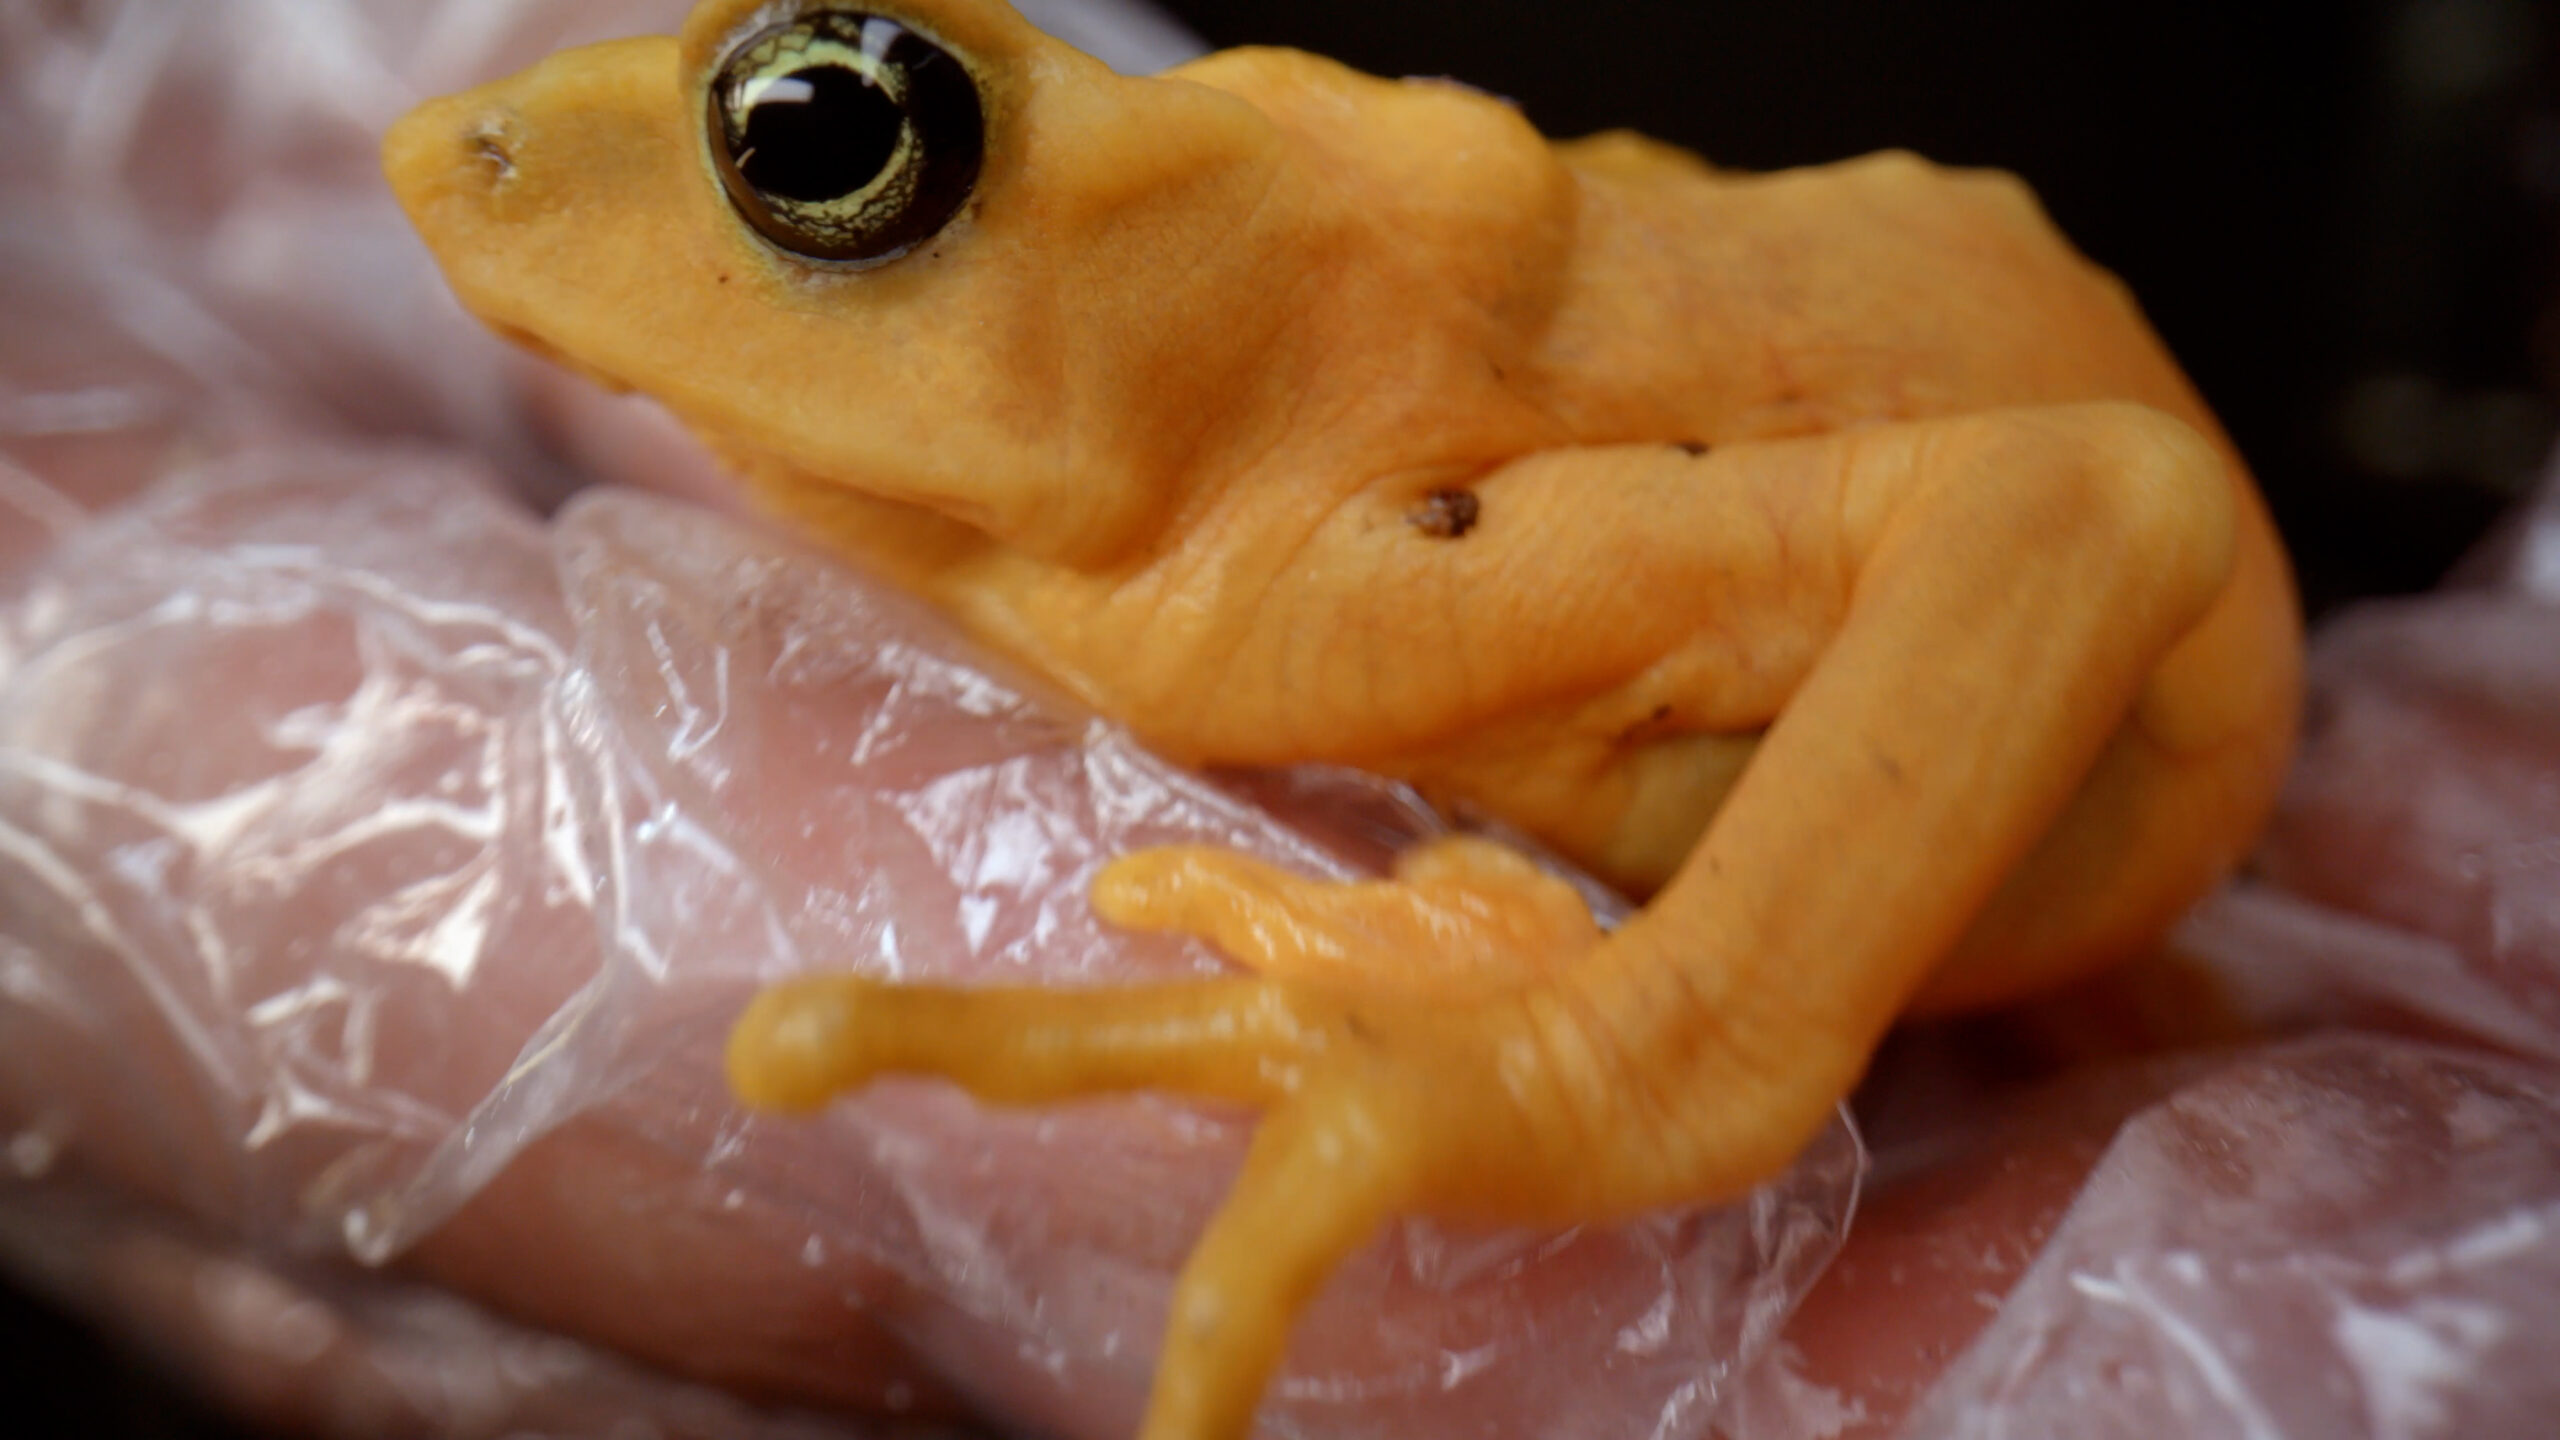 A golden frog on a gloved hand.